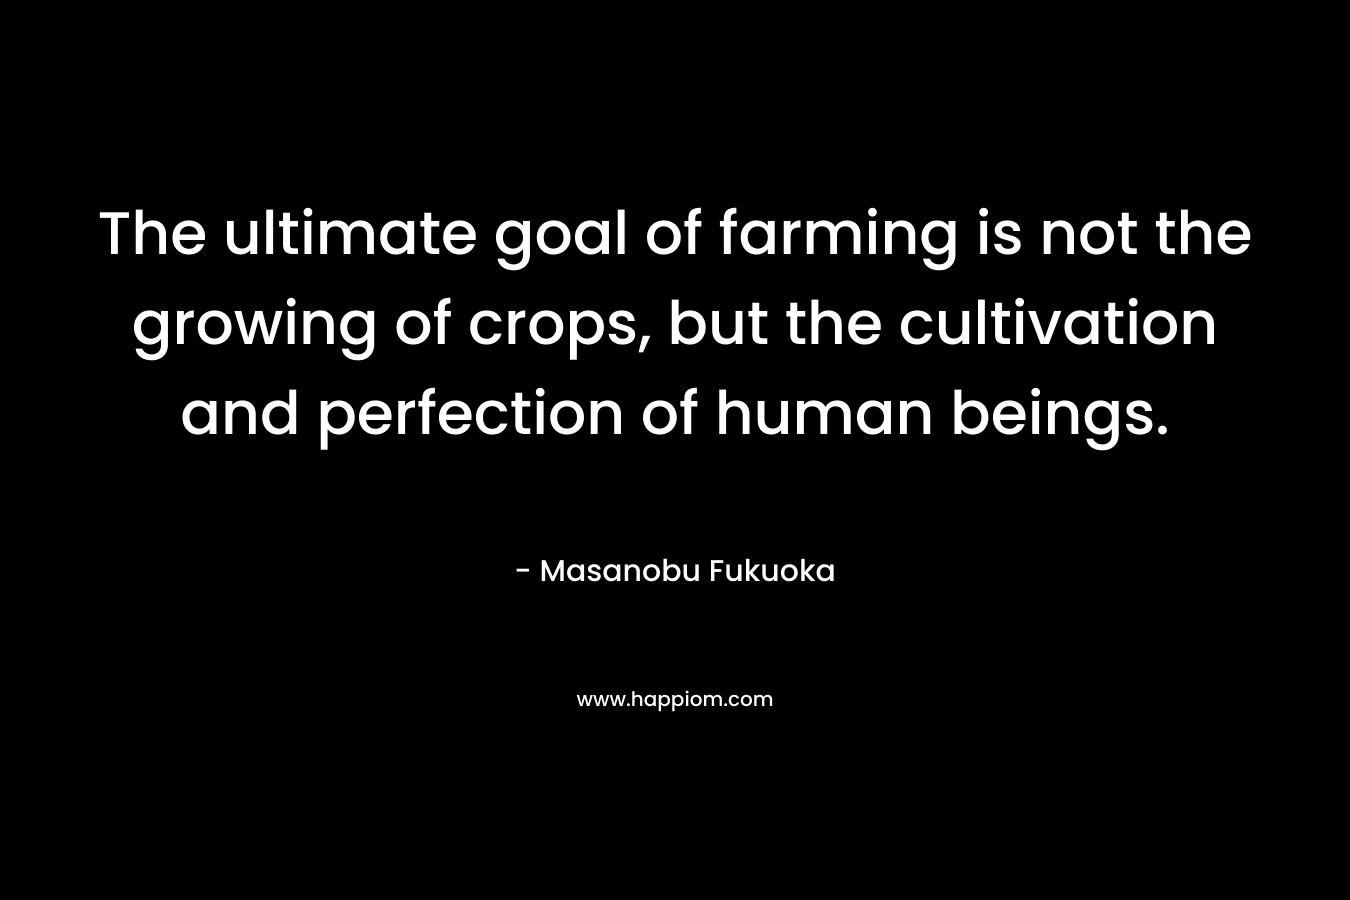 The ultimate goal of farming is not the growing of crops, but the cultivation and perfection of human beings.